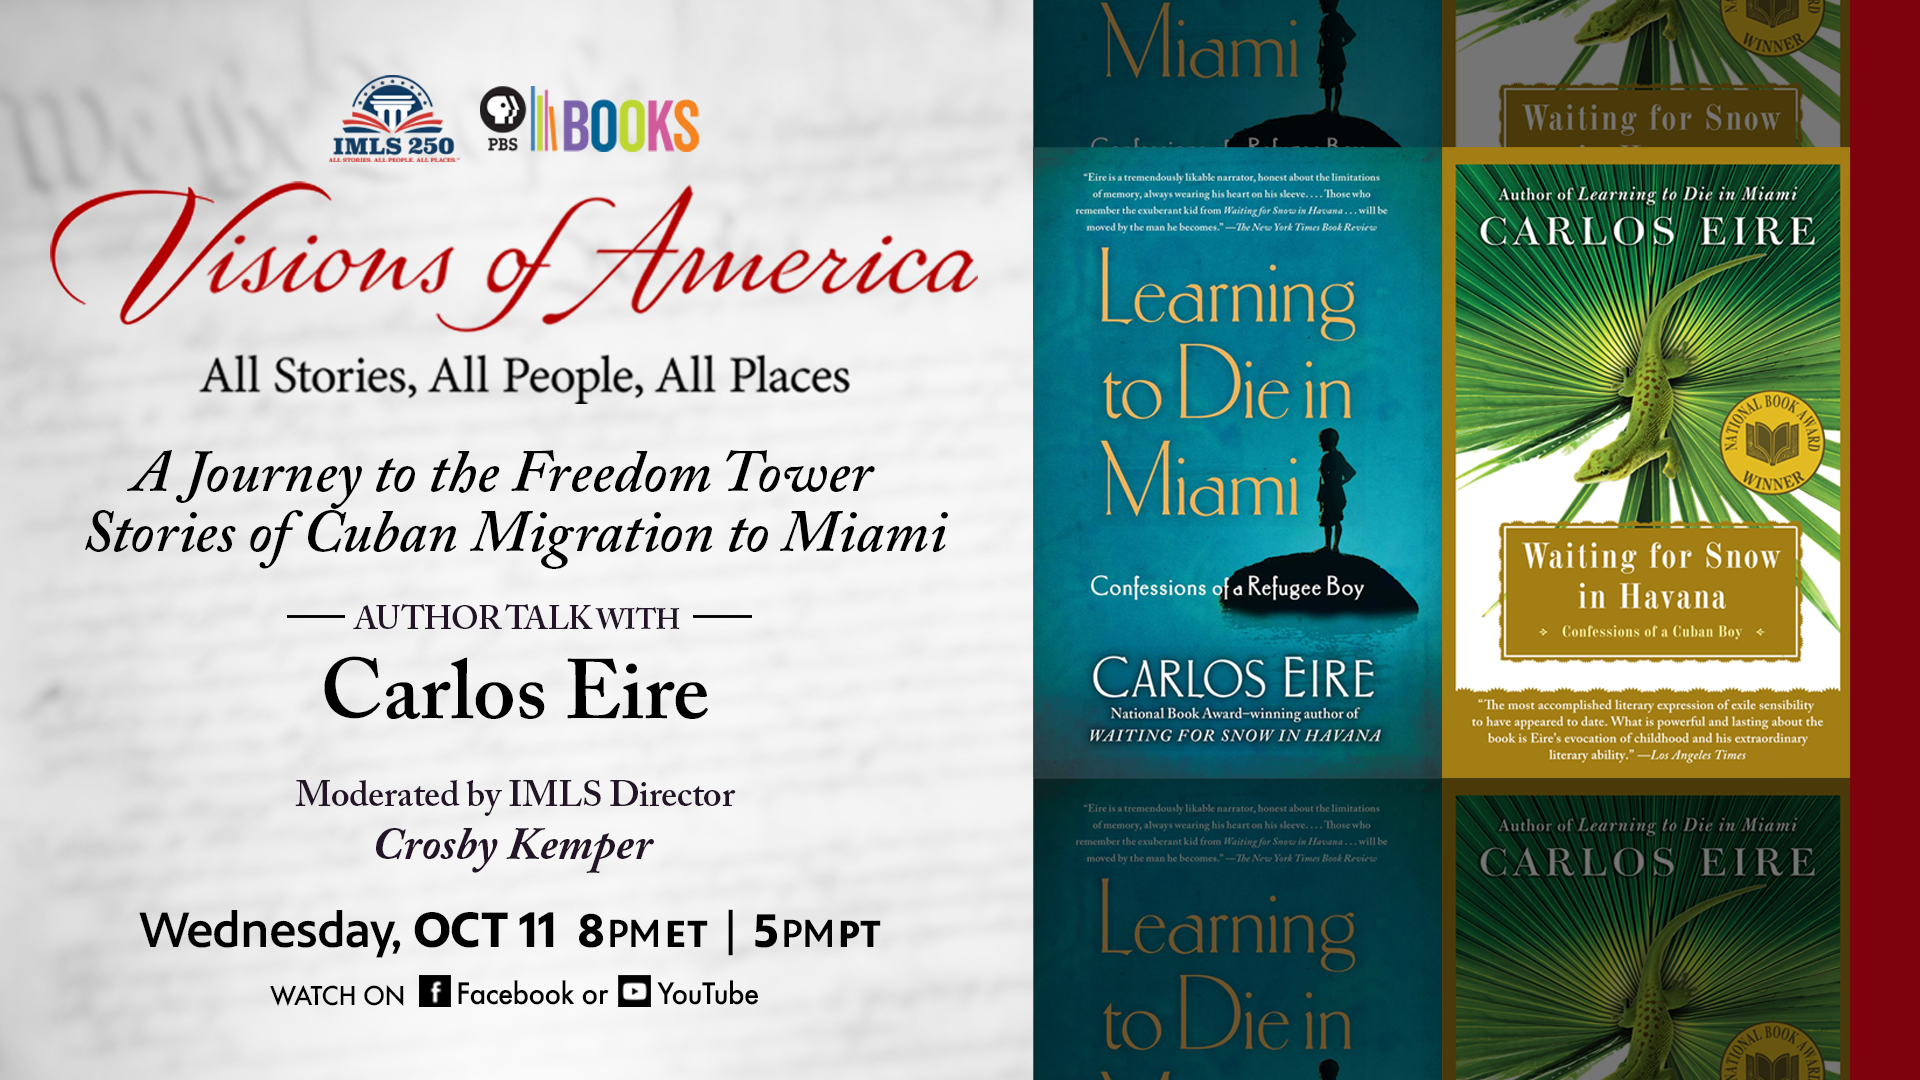 Visions of America program info with Carlos Eire